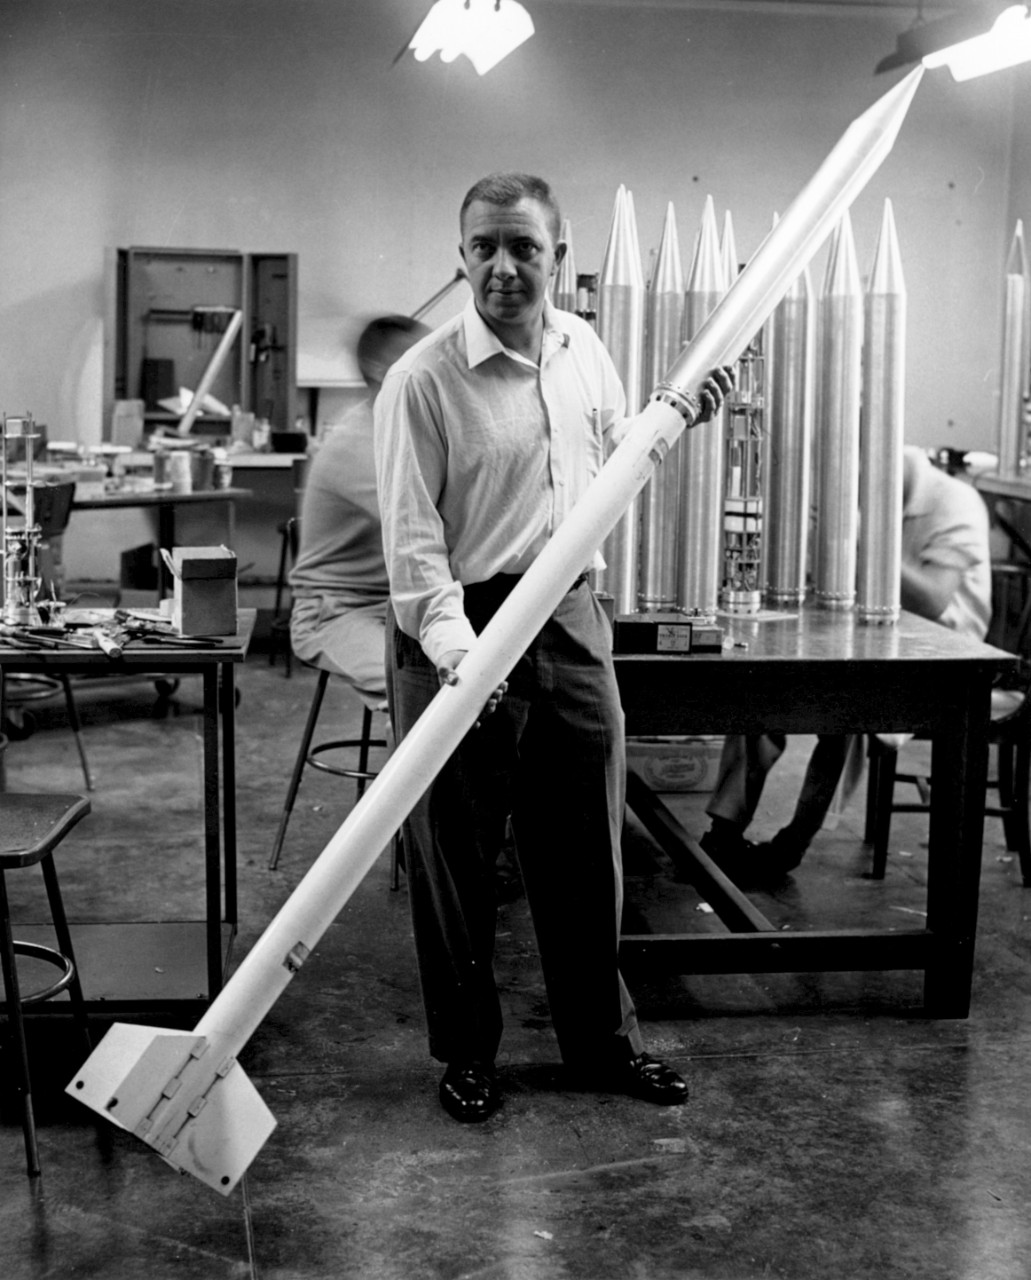 1954 - Naval Officer and Rocket Scientist Astrophysicist and U.S. Naval officer James Van Allen is shown here holding a sounding rocket. After serving as an ordnance officer in World War II, Van Allen’s goundbreaking research work into rockets and radiation belts were vital to getting humans safely into outer space. Among the many honors he received, Time magazine awarded him their “Man of the Year” prize in 1960. (Photo courtesy of NASA/JPL)